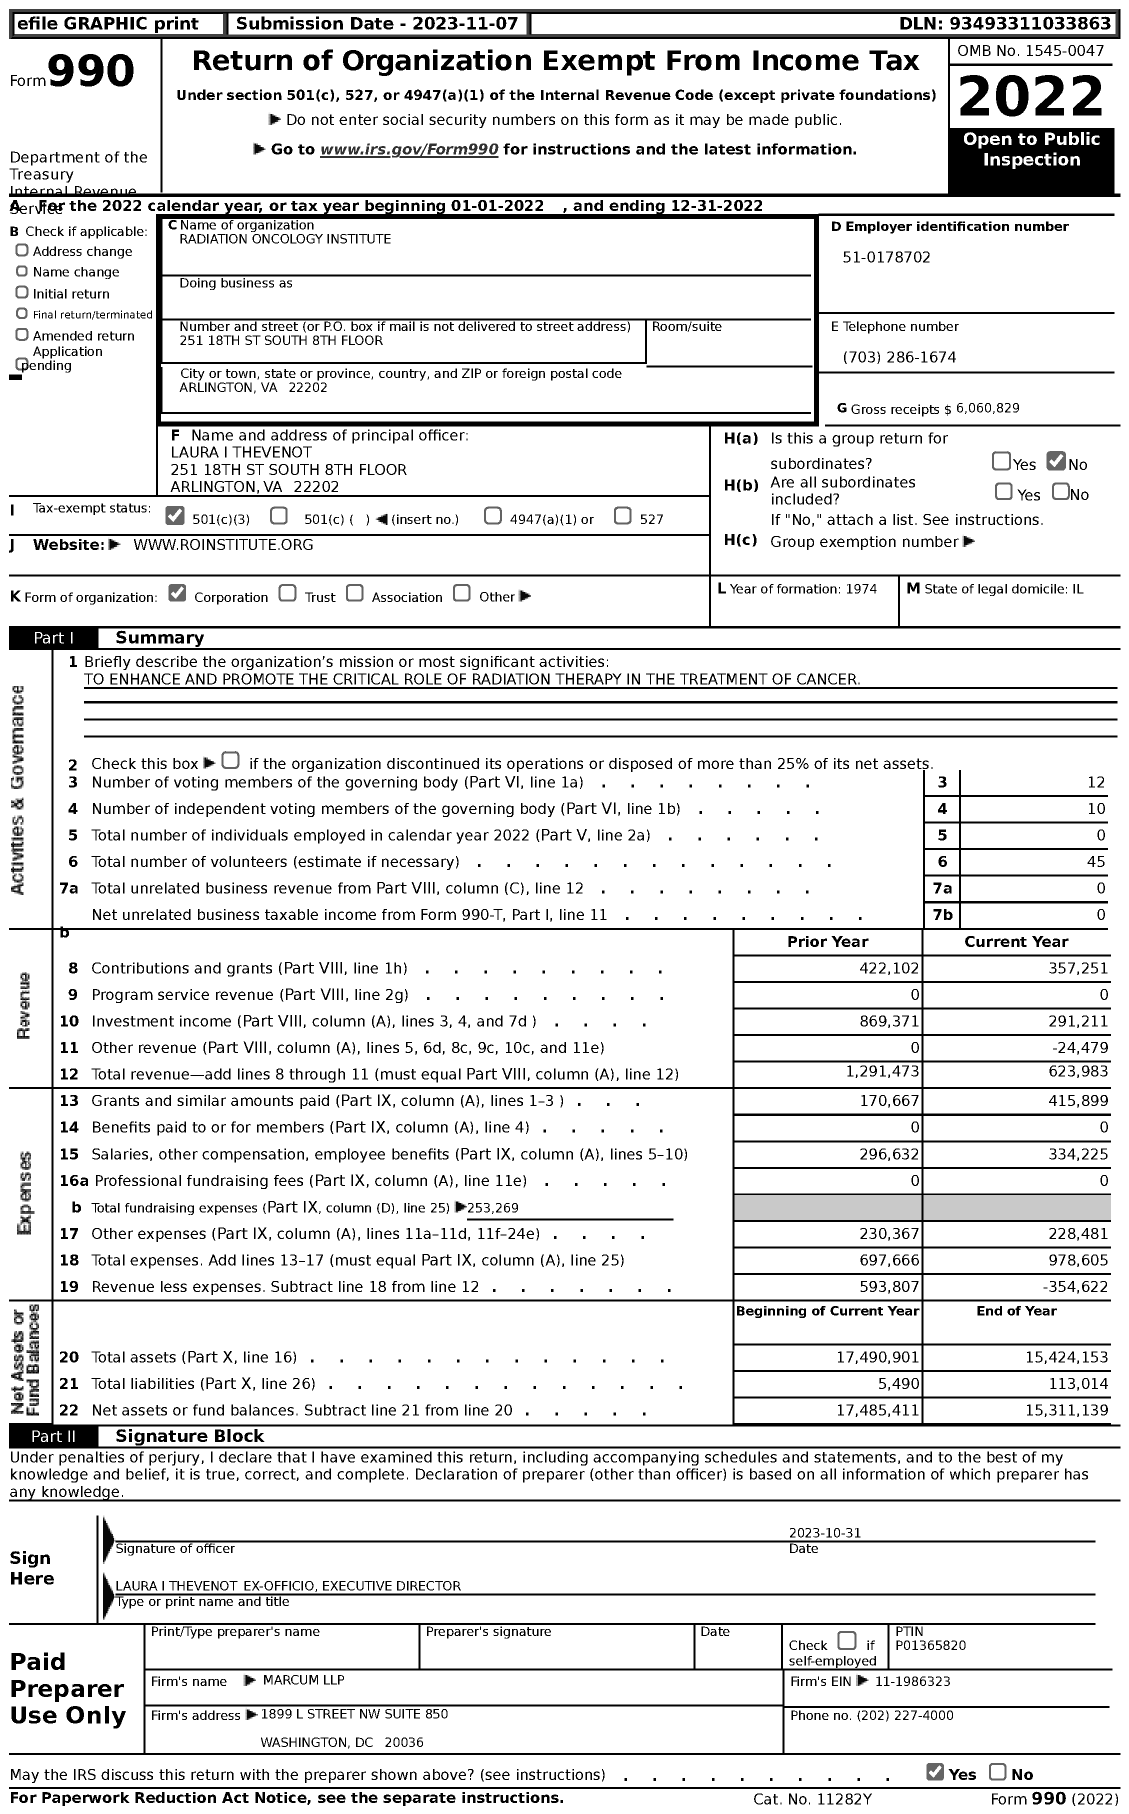 Image of first page of 2022 Form 990 for Radiation Oncology Institute (ROI)